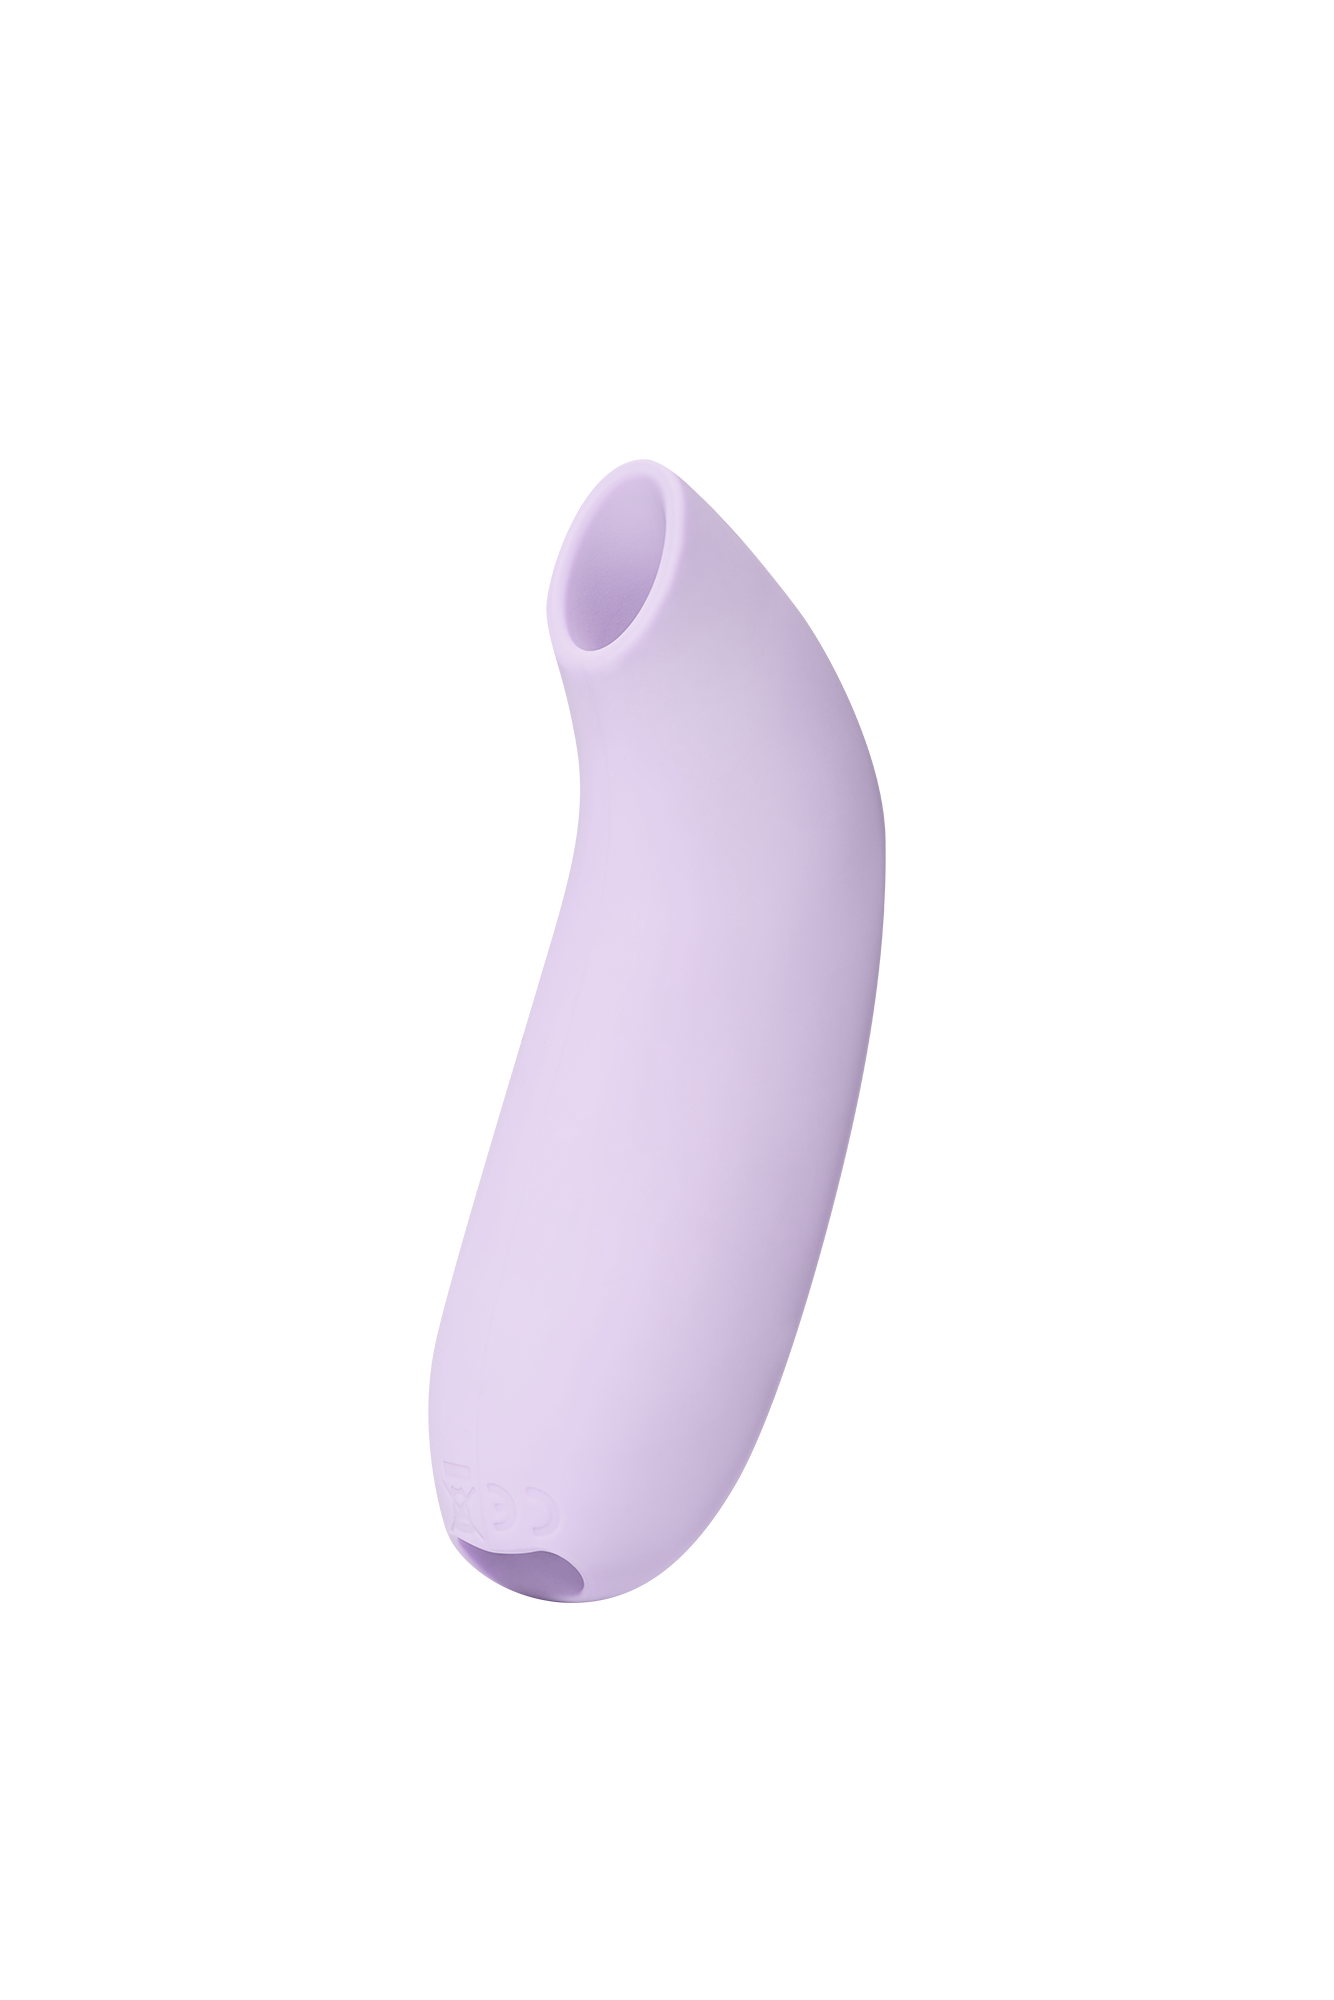 Lavender | Light purple suction toy on white background